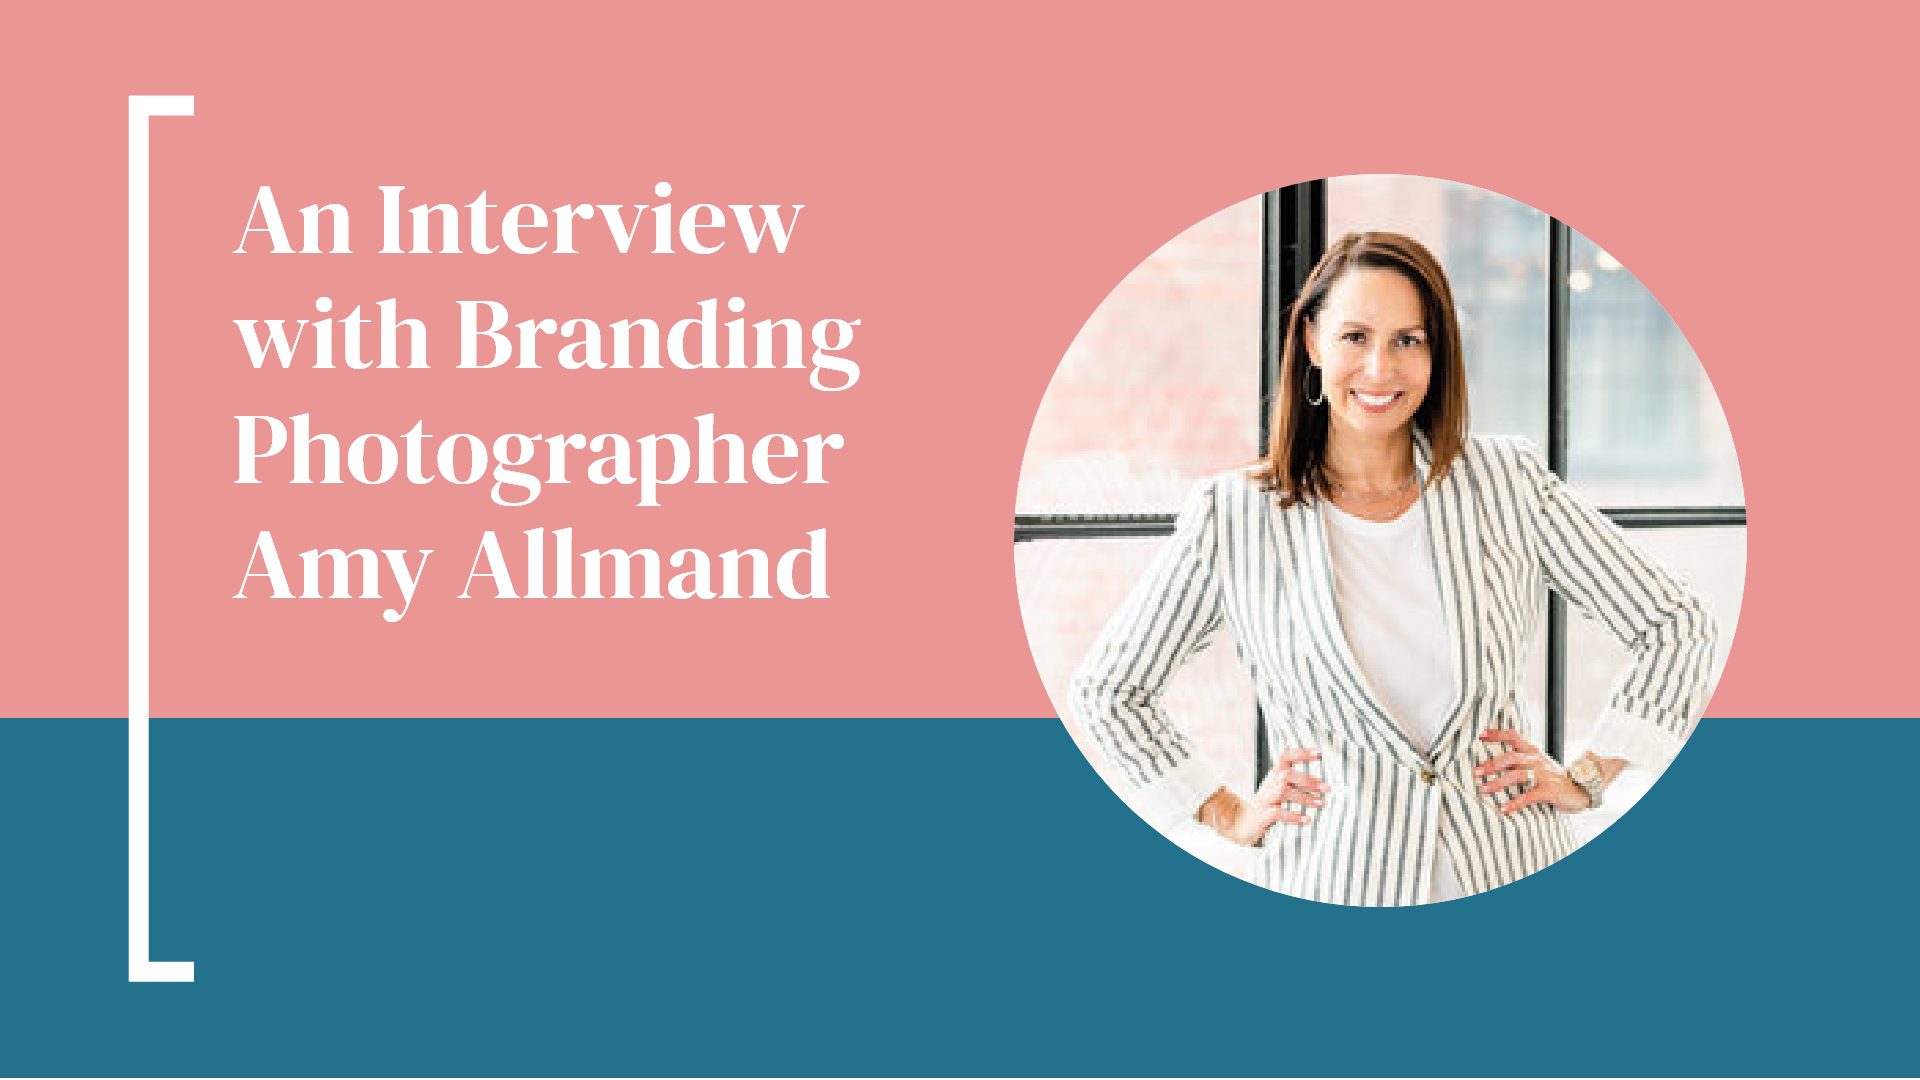 An Interview with Branding Photographer Amy Allmand